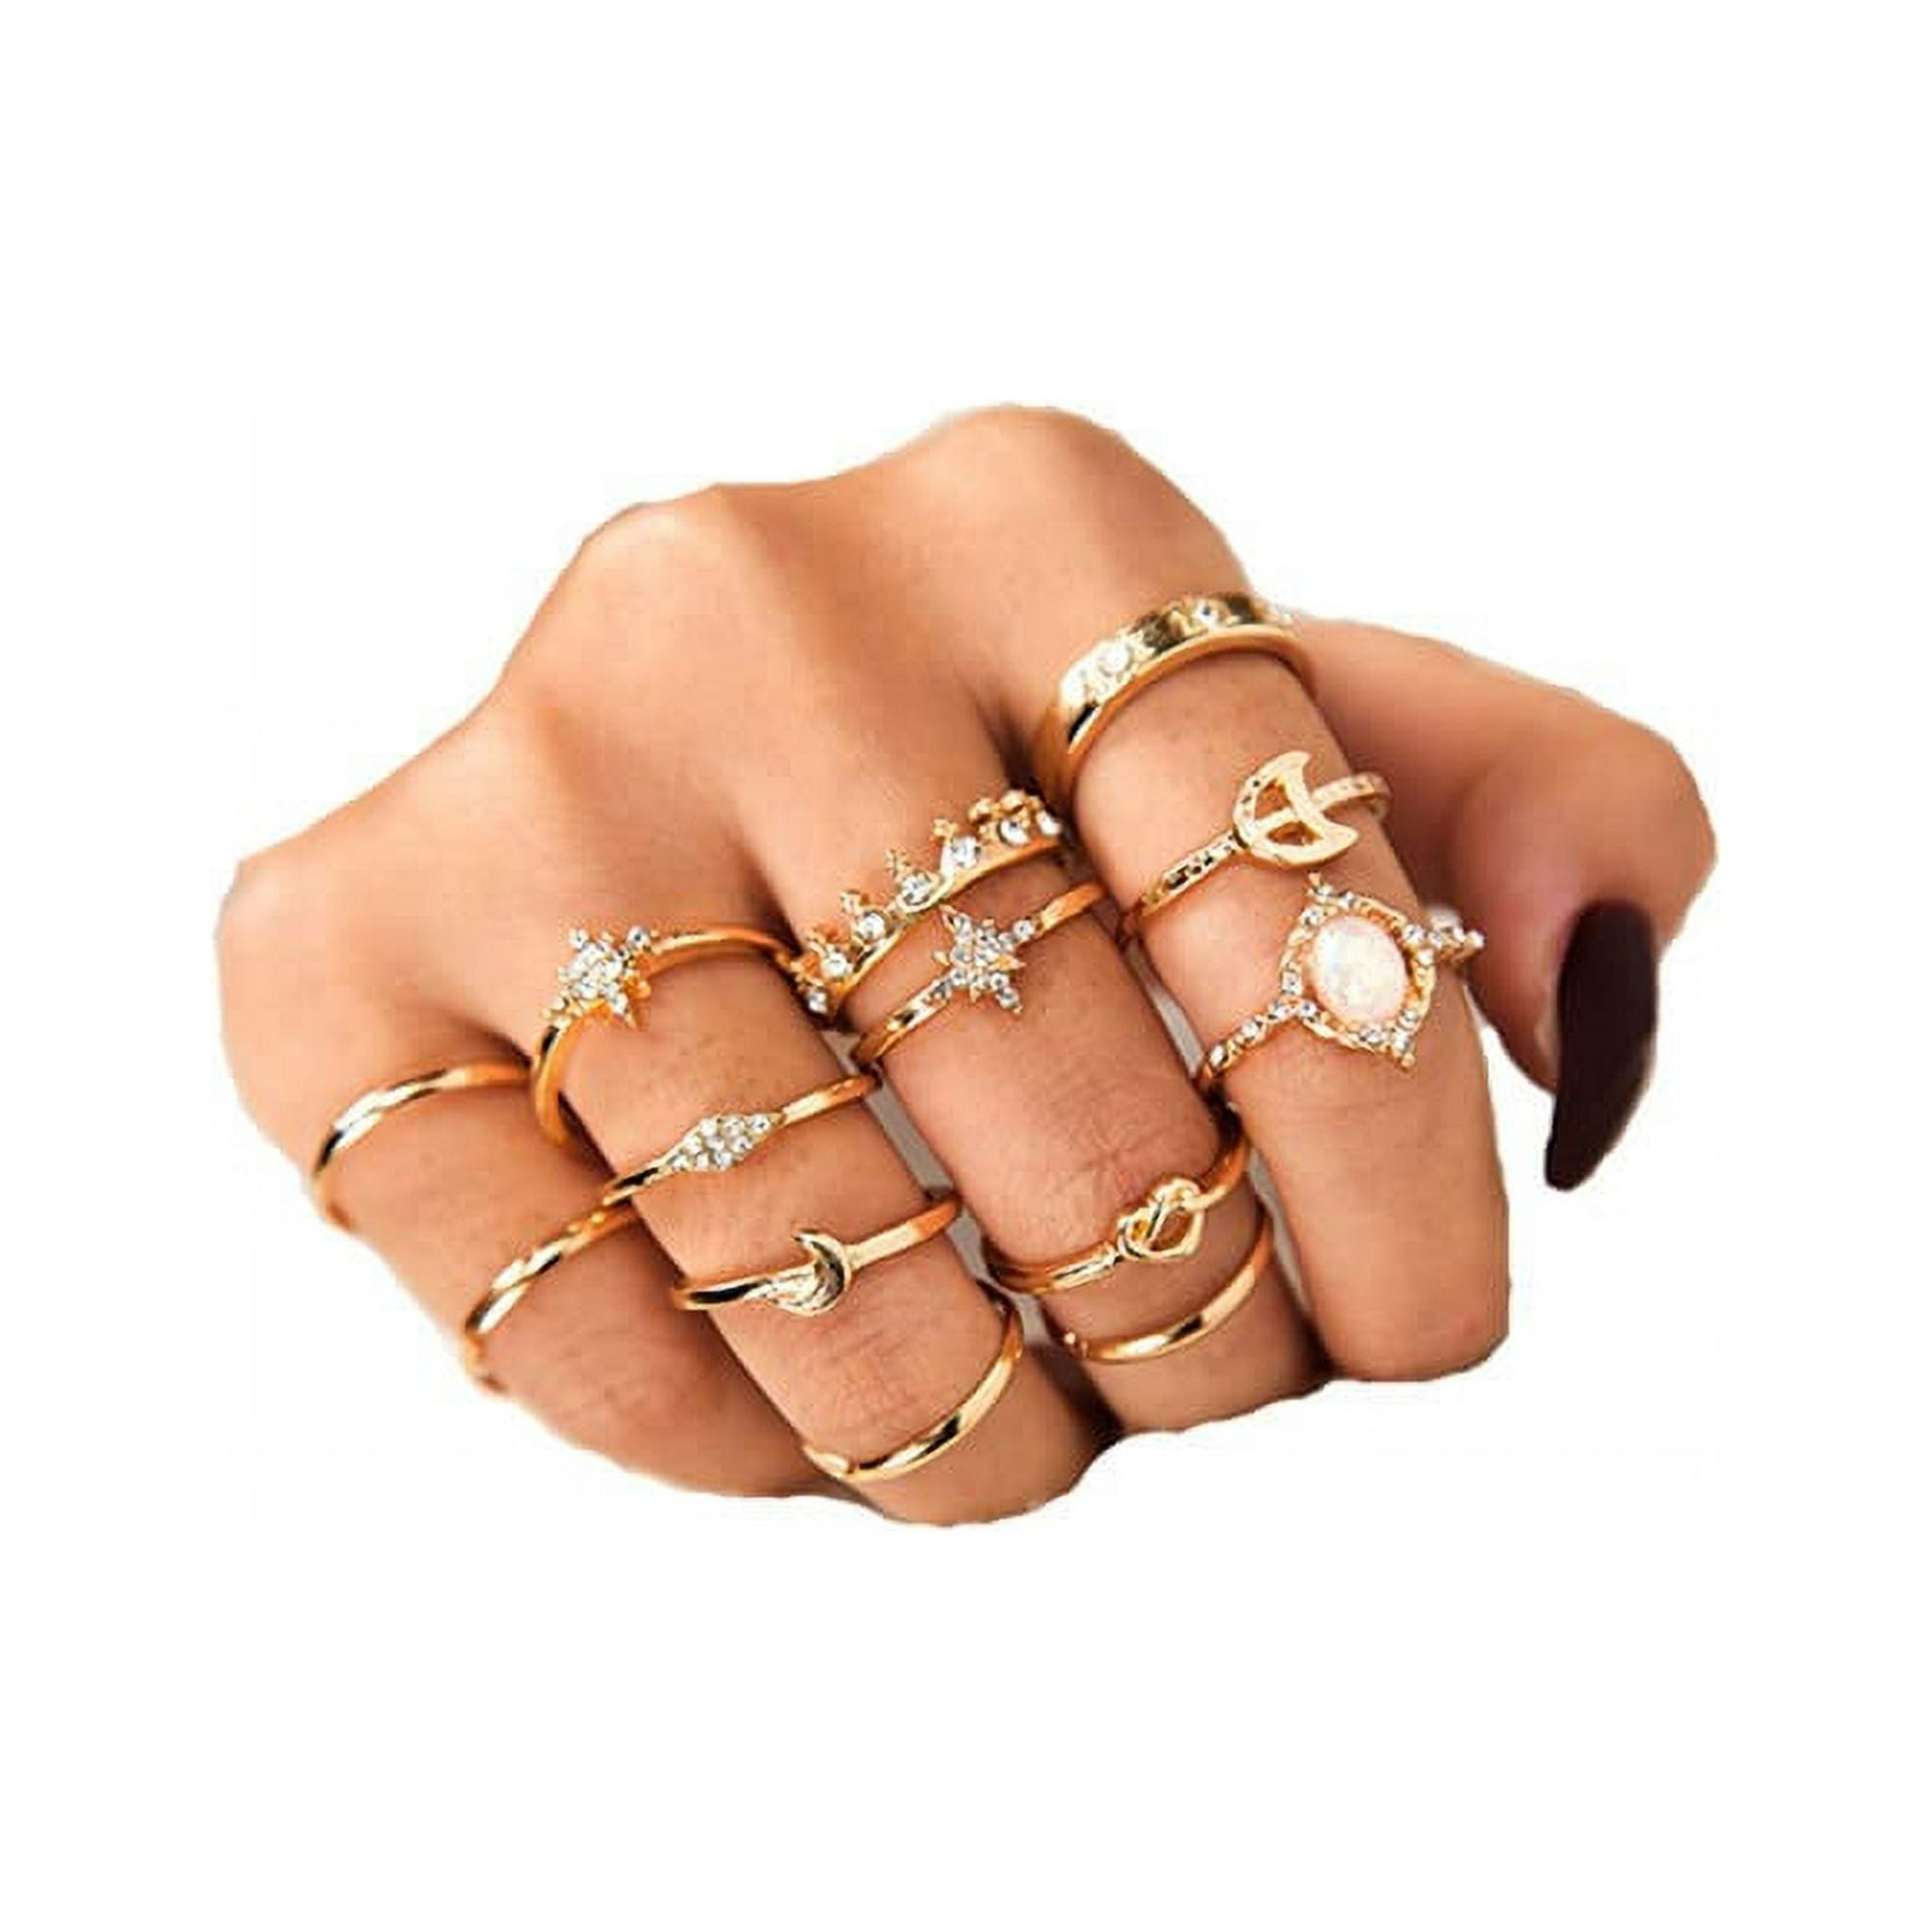 Sither 13 Pcs Women Rings Set Knuckle Gold Bohemian Rings for Girls Vintage  Gem Crystal Joint Knot Ring for Teens Party Daily Fesvital Jewelry